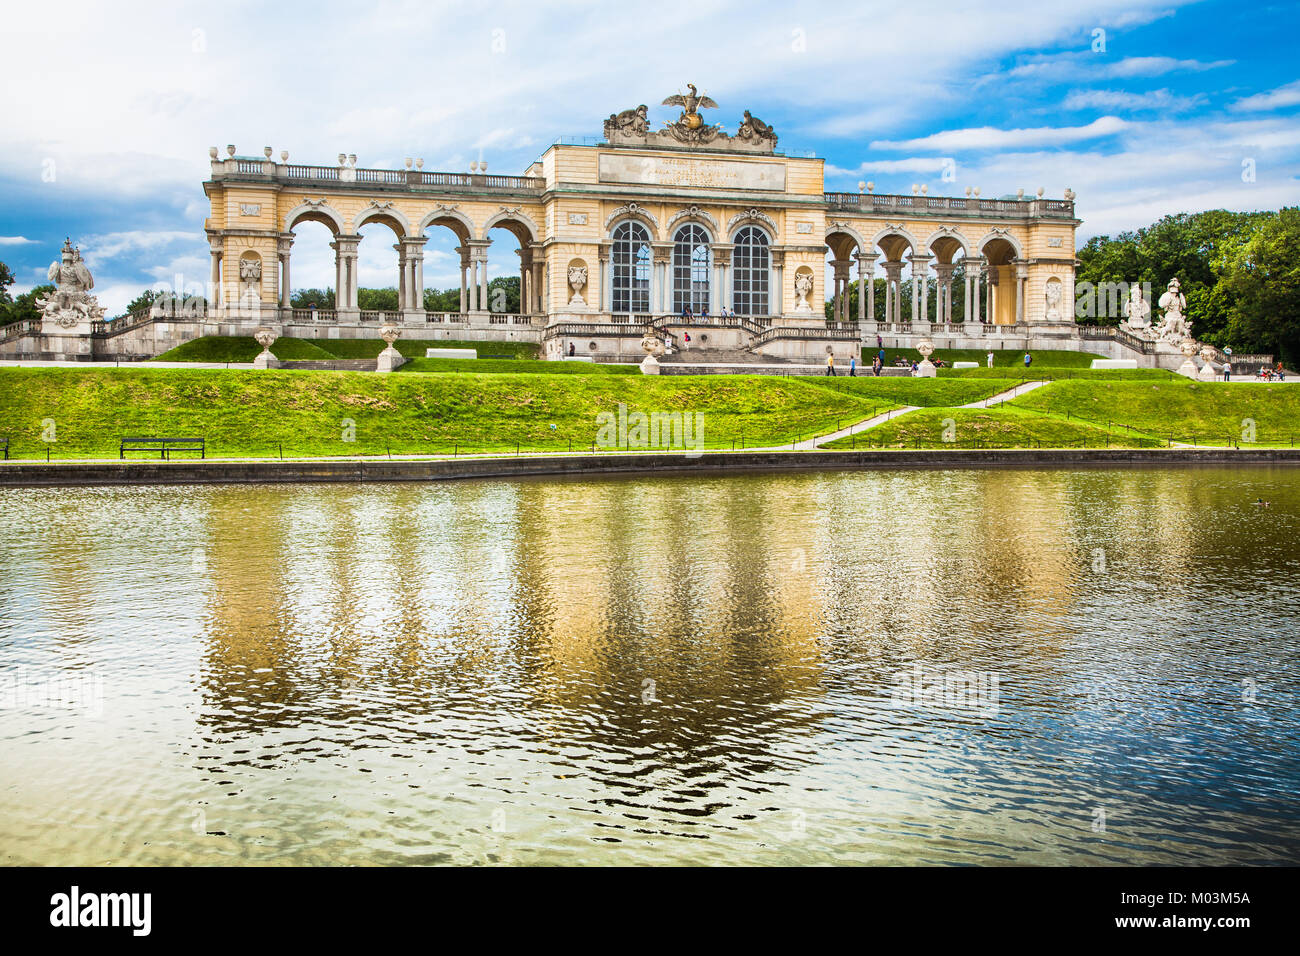 Beautiful view of famous Gloriette at Schonbrunn Palace and Gardens in Vienna, Austria Stock Photo